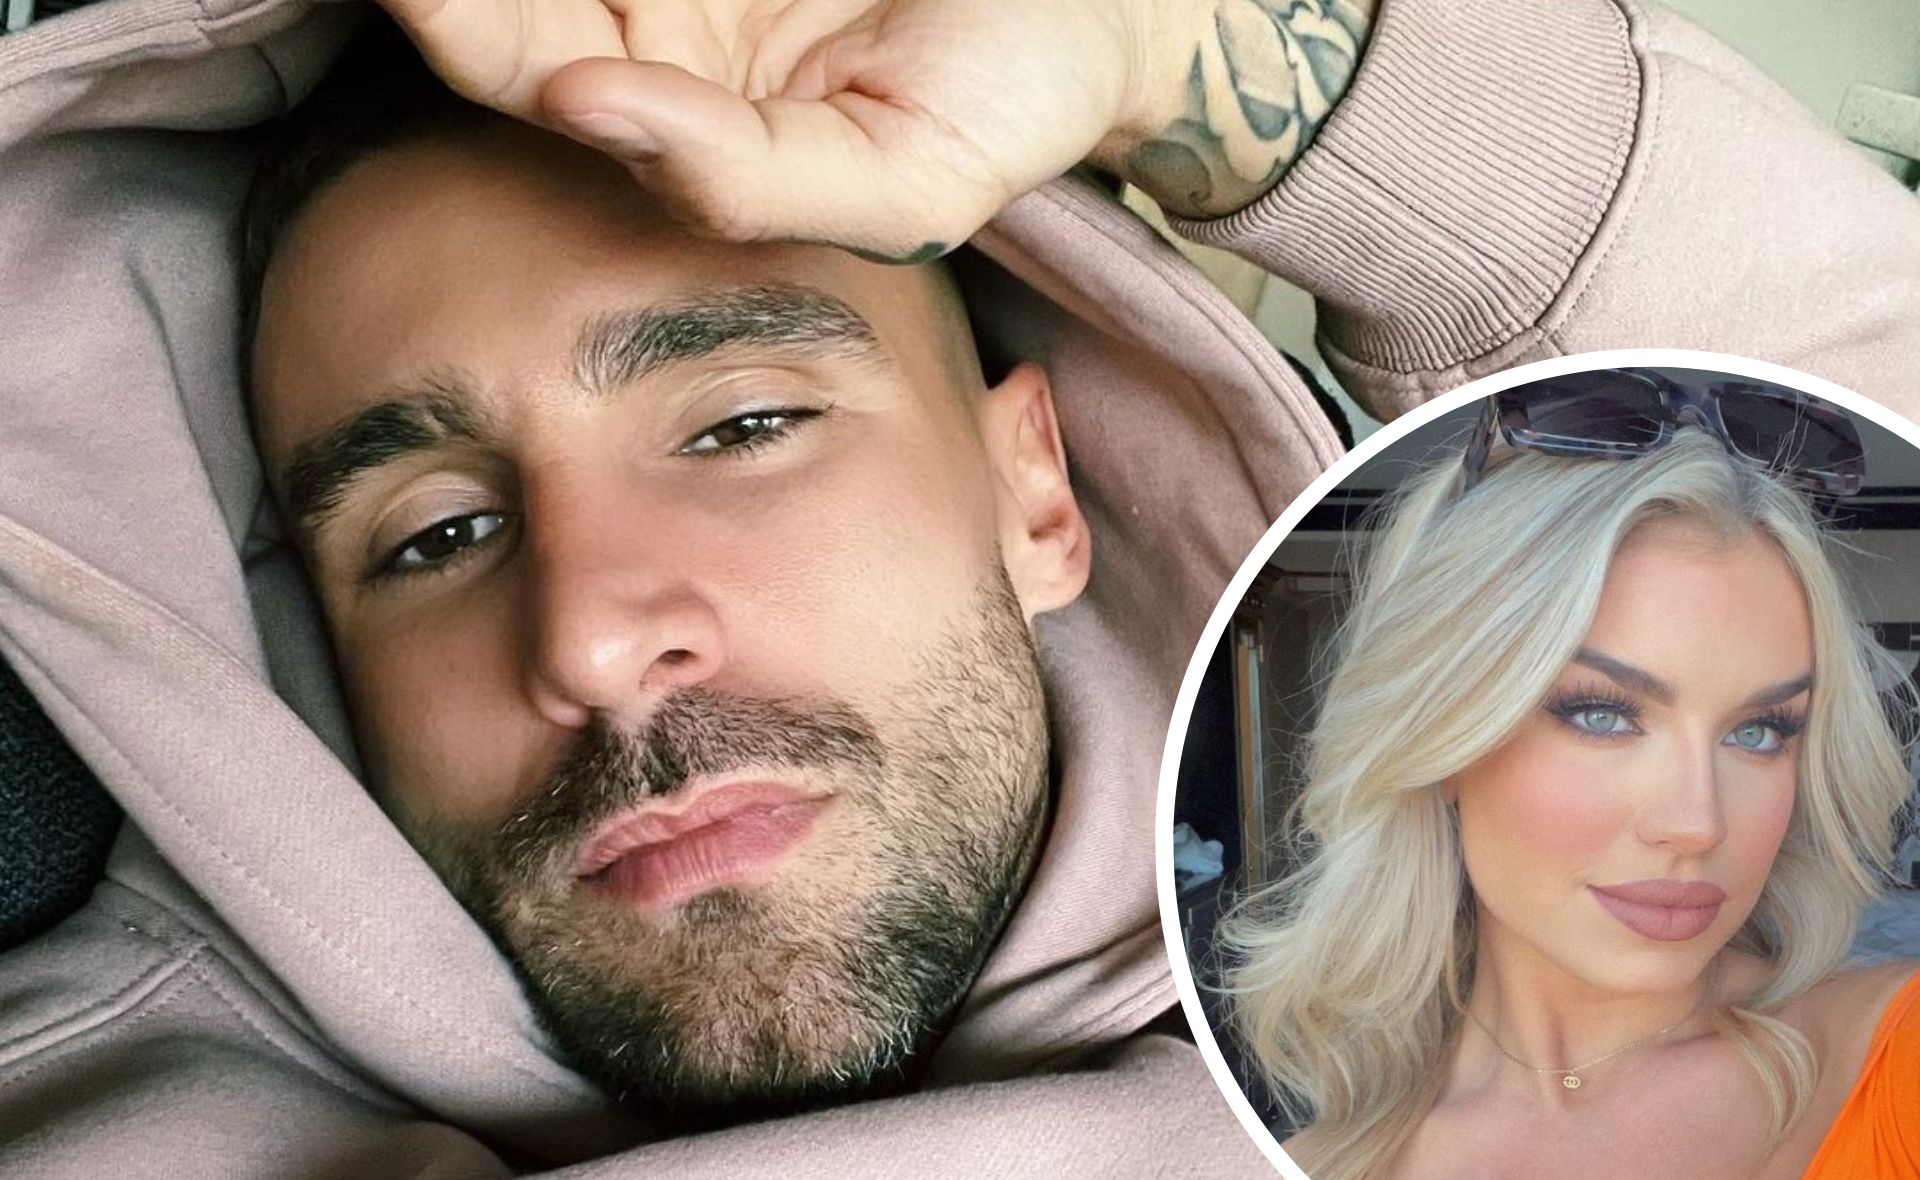 Married At First Sight star Brent Vitiello confirms relationship with Aussie model Taylor Davey